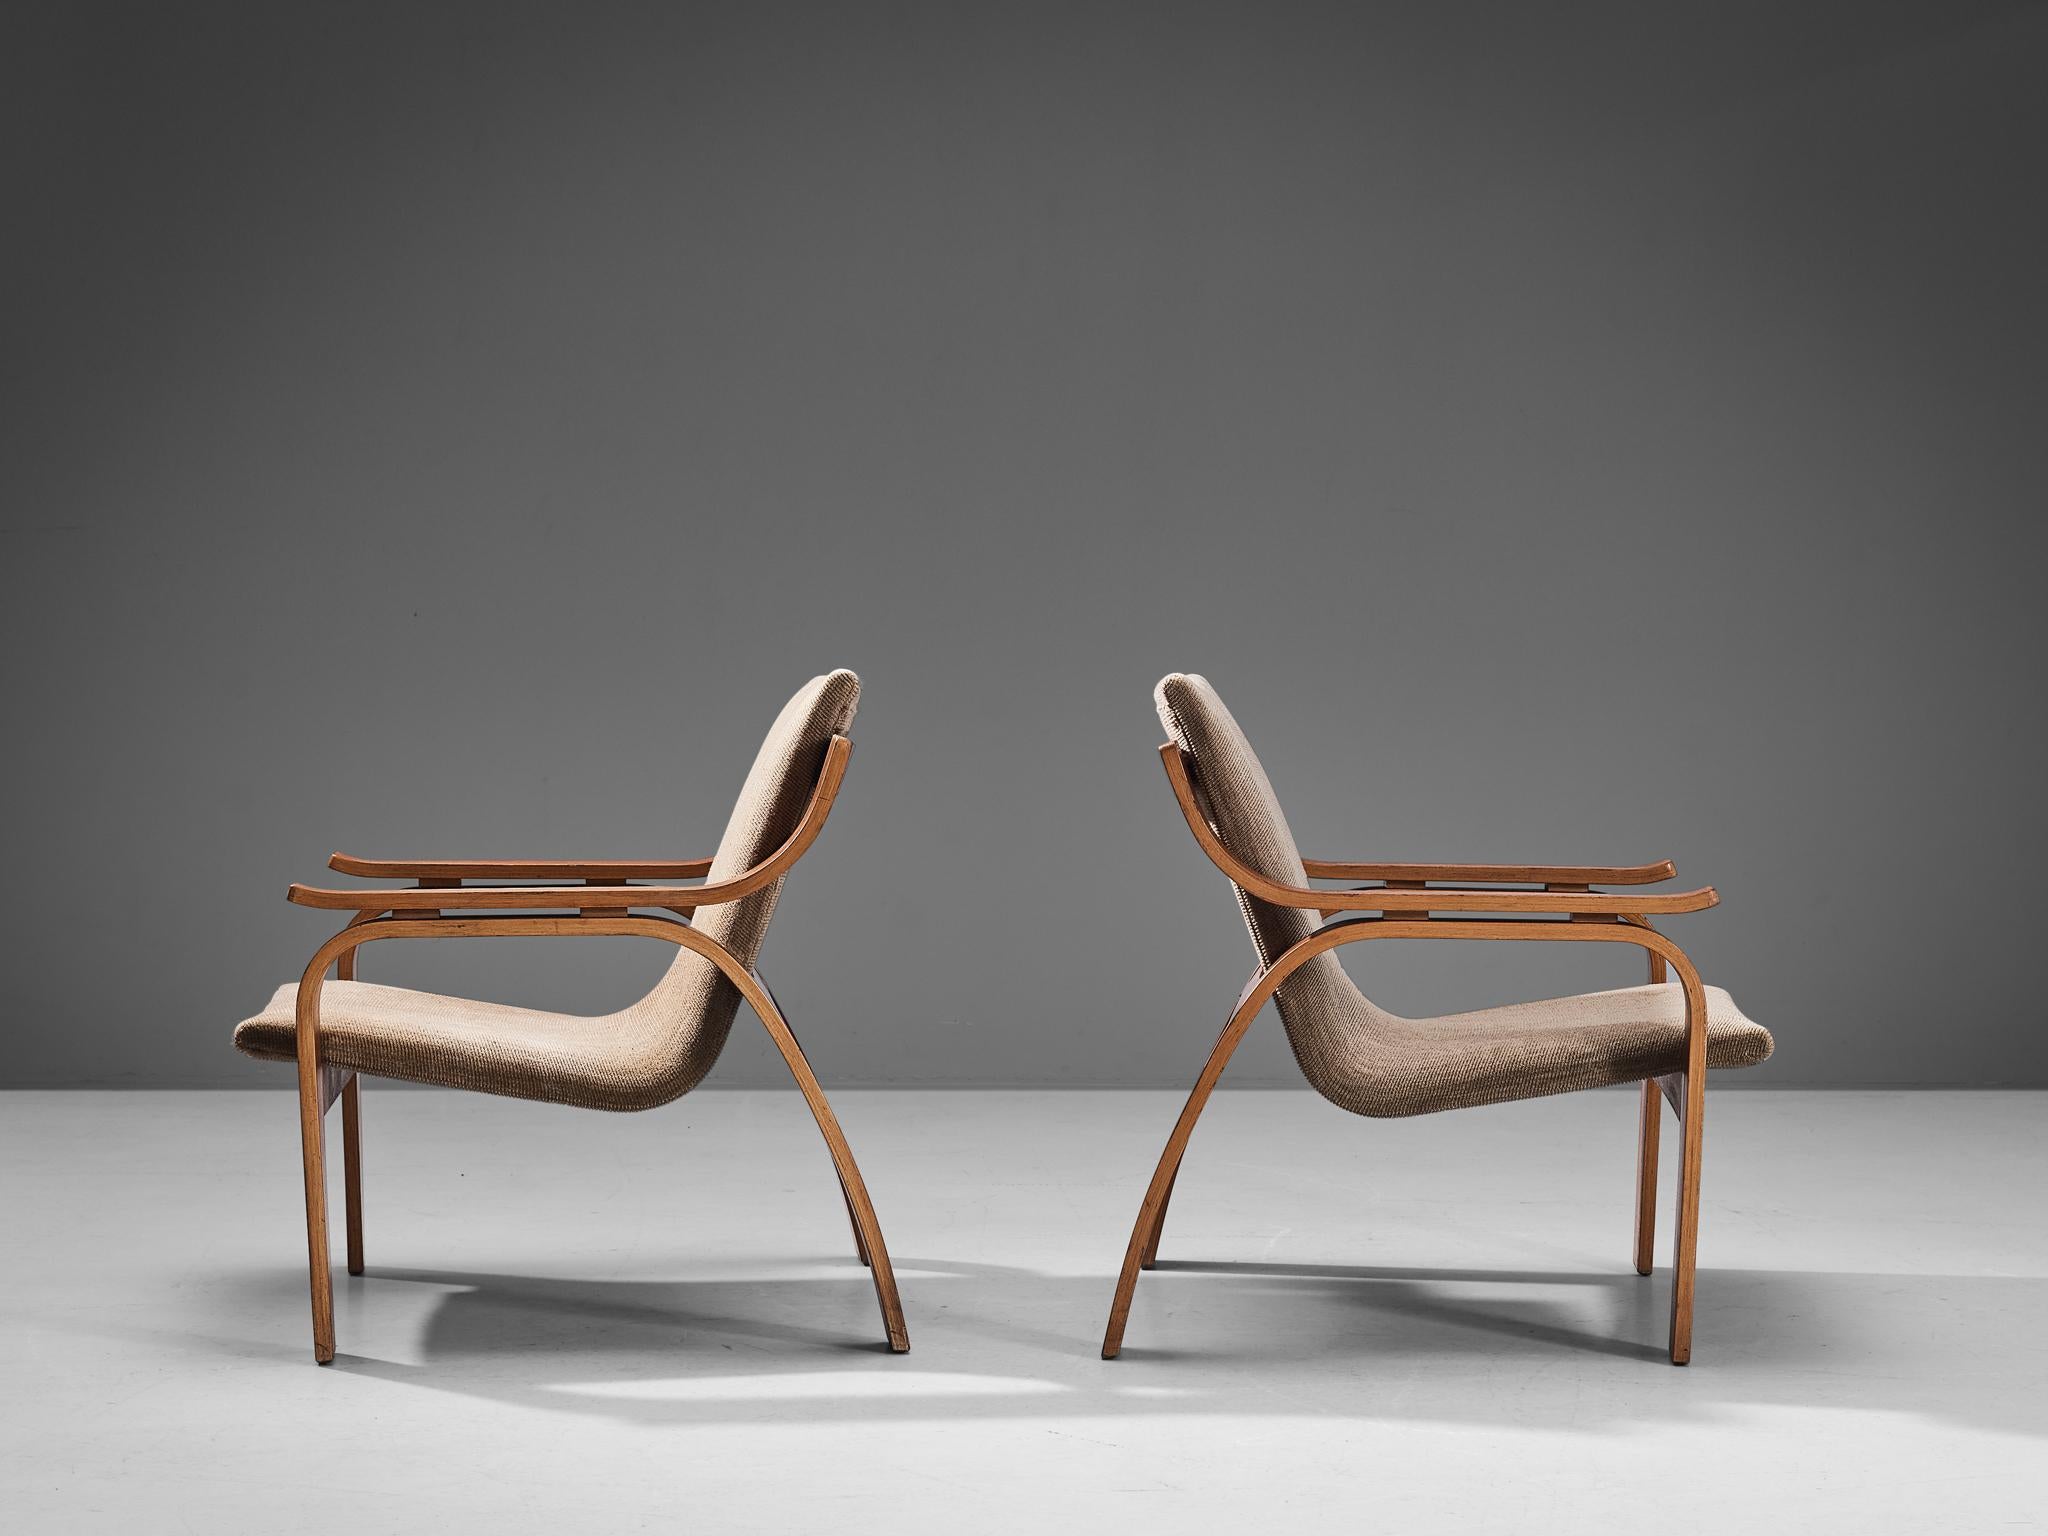 Late 20th Century Bentwood Pair of Lounge Chairs in Mahogany and Sand Upholstery